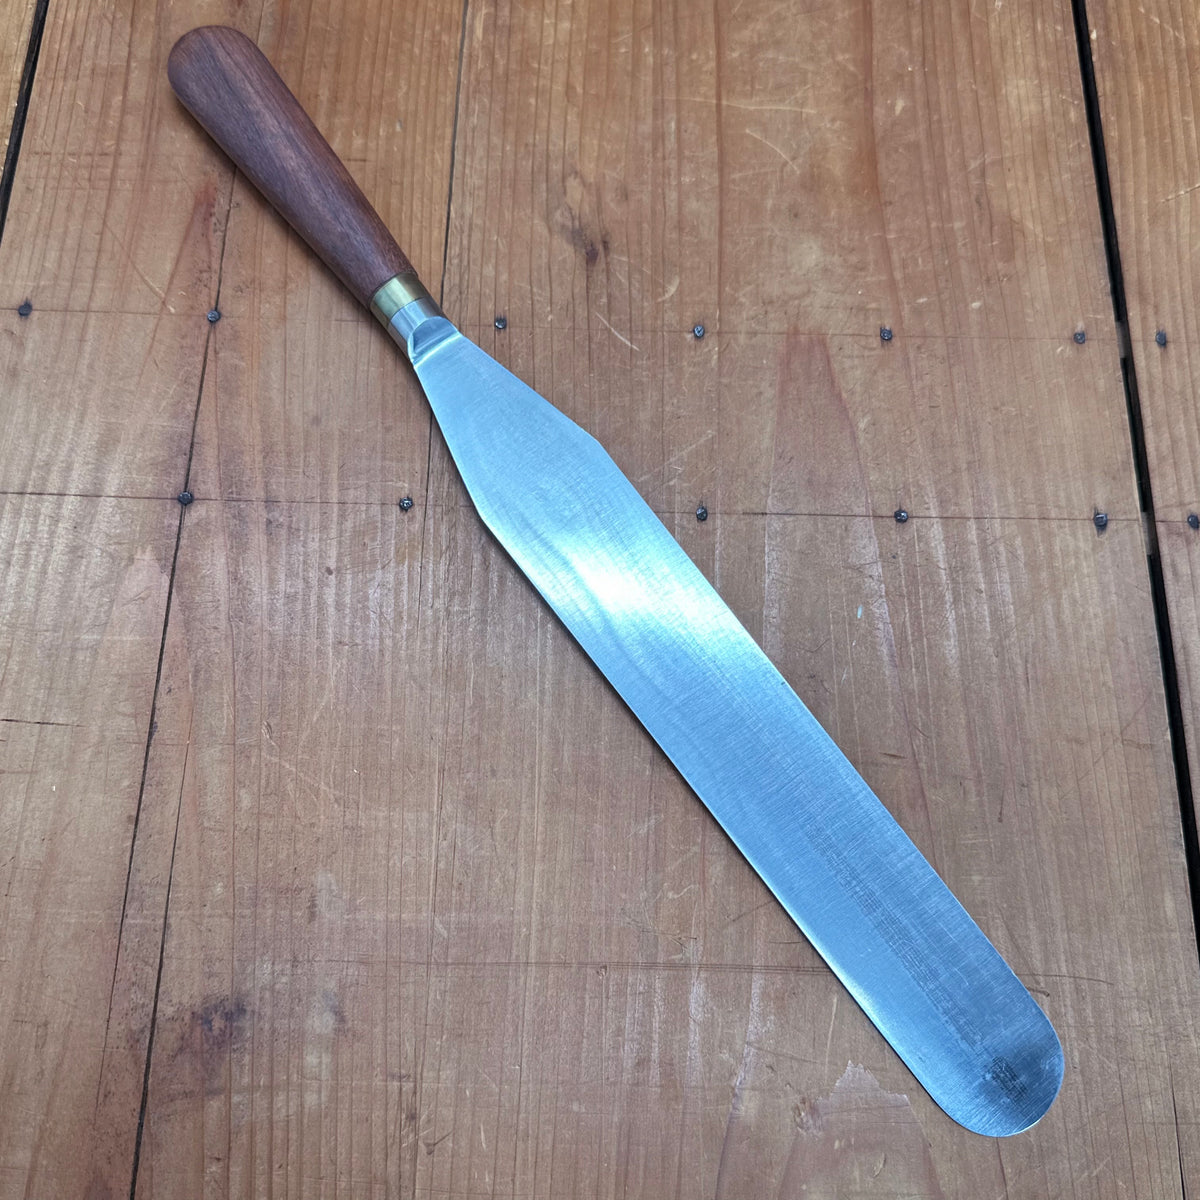 New Vintage Vorex 10" Spatula Forged Stainless Steel Rosewood Thiers, France